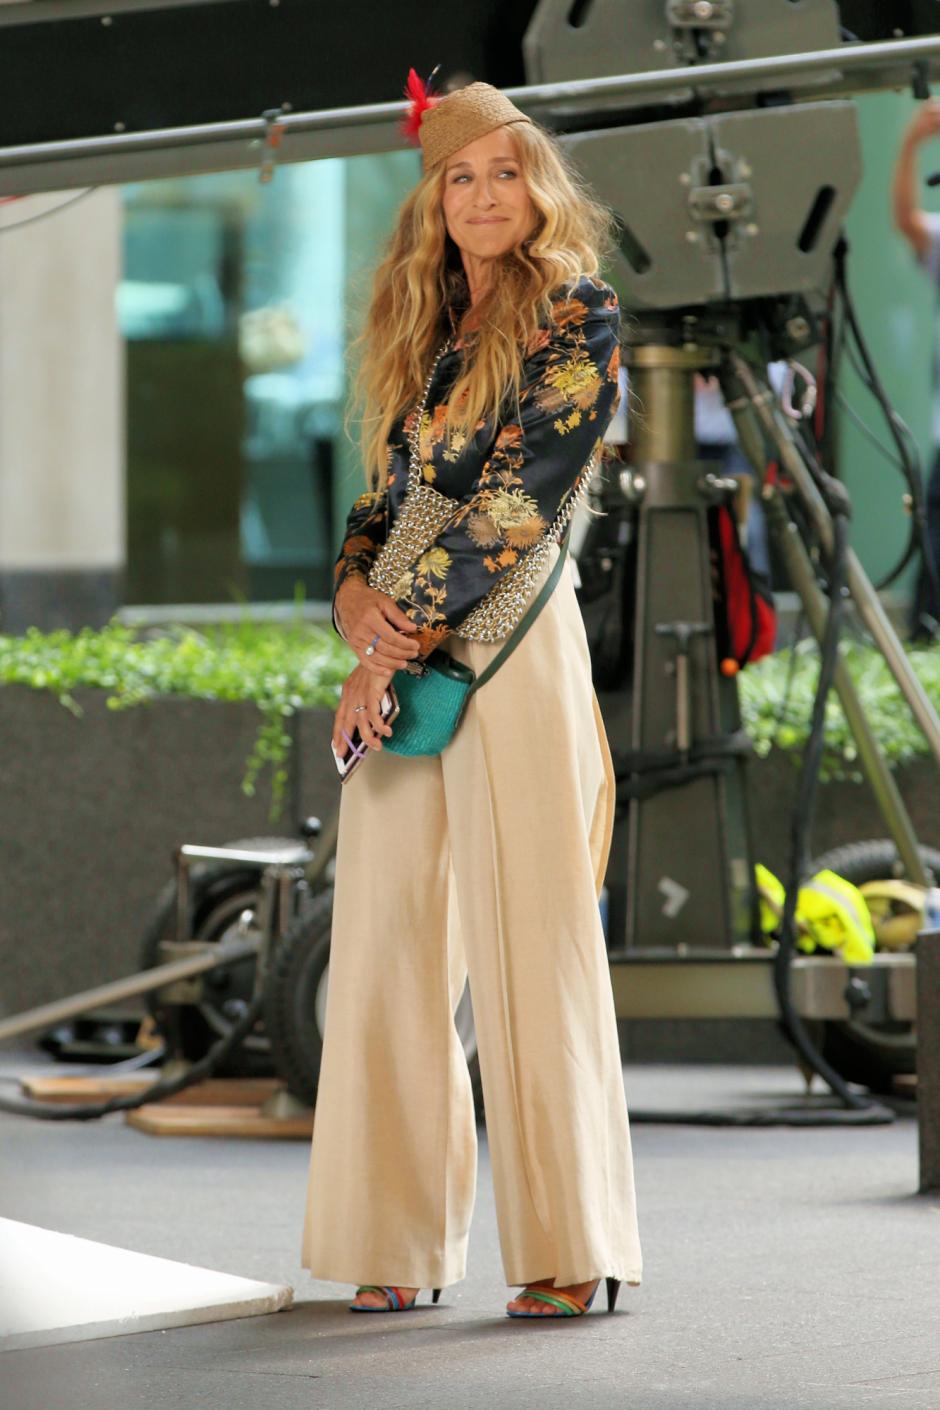 Actress Sarah Jessica Parker  filming "And Just Like That" Set In NYC